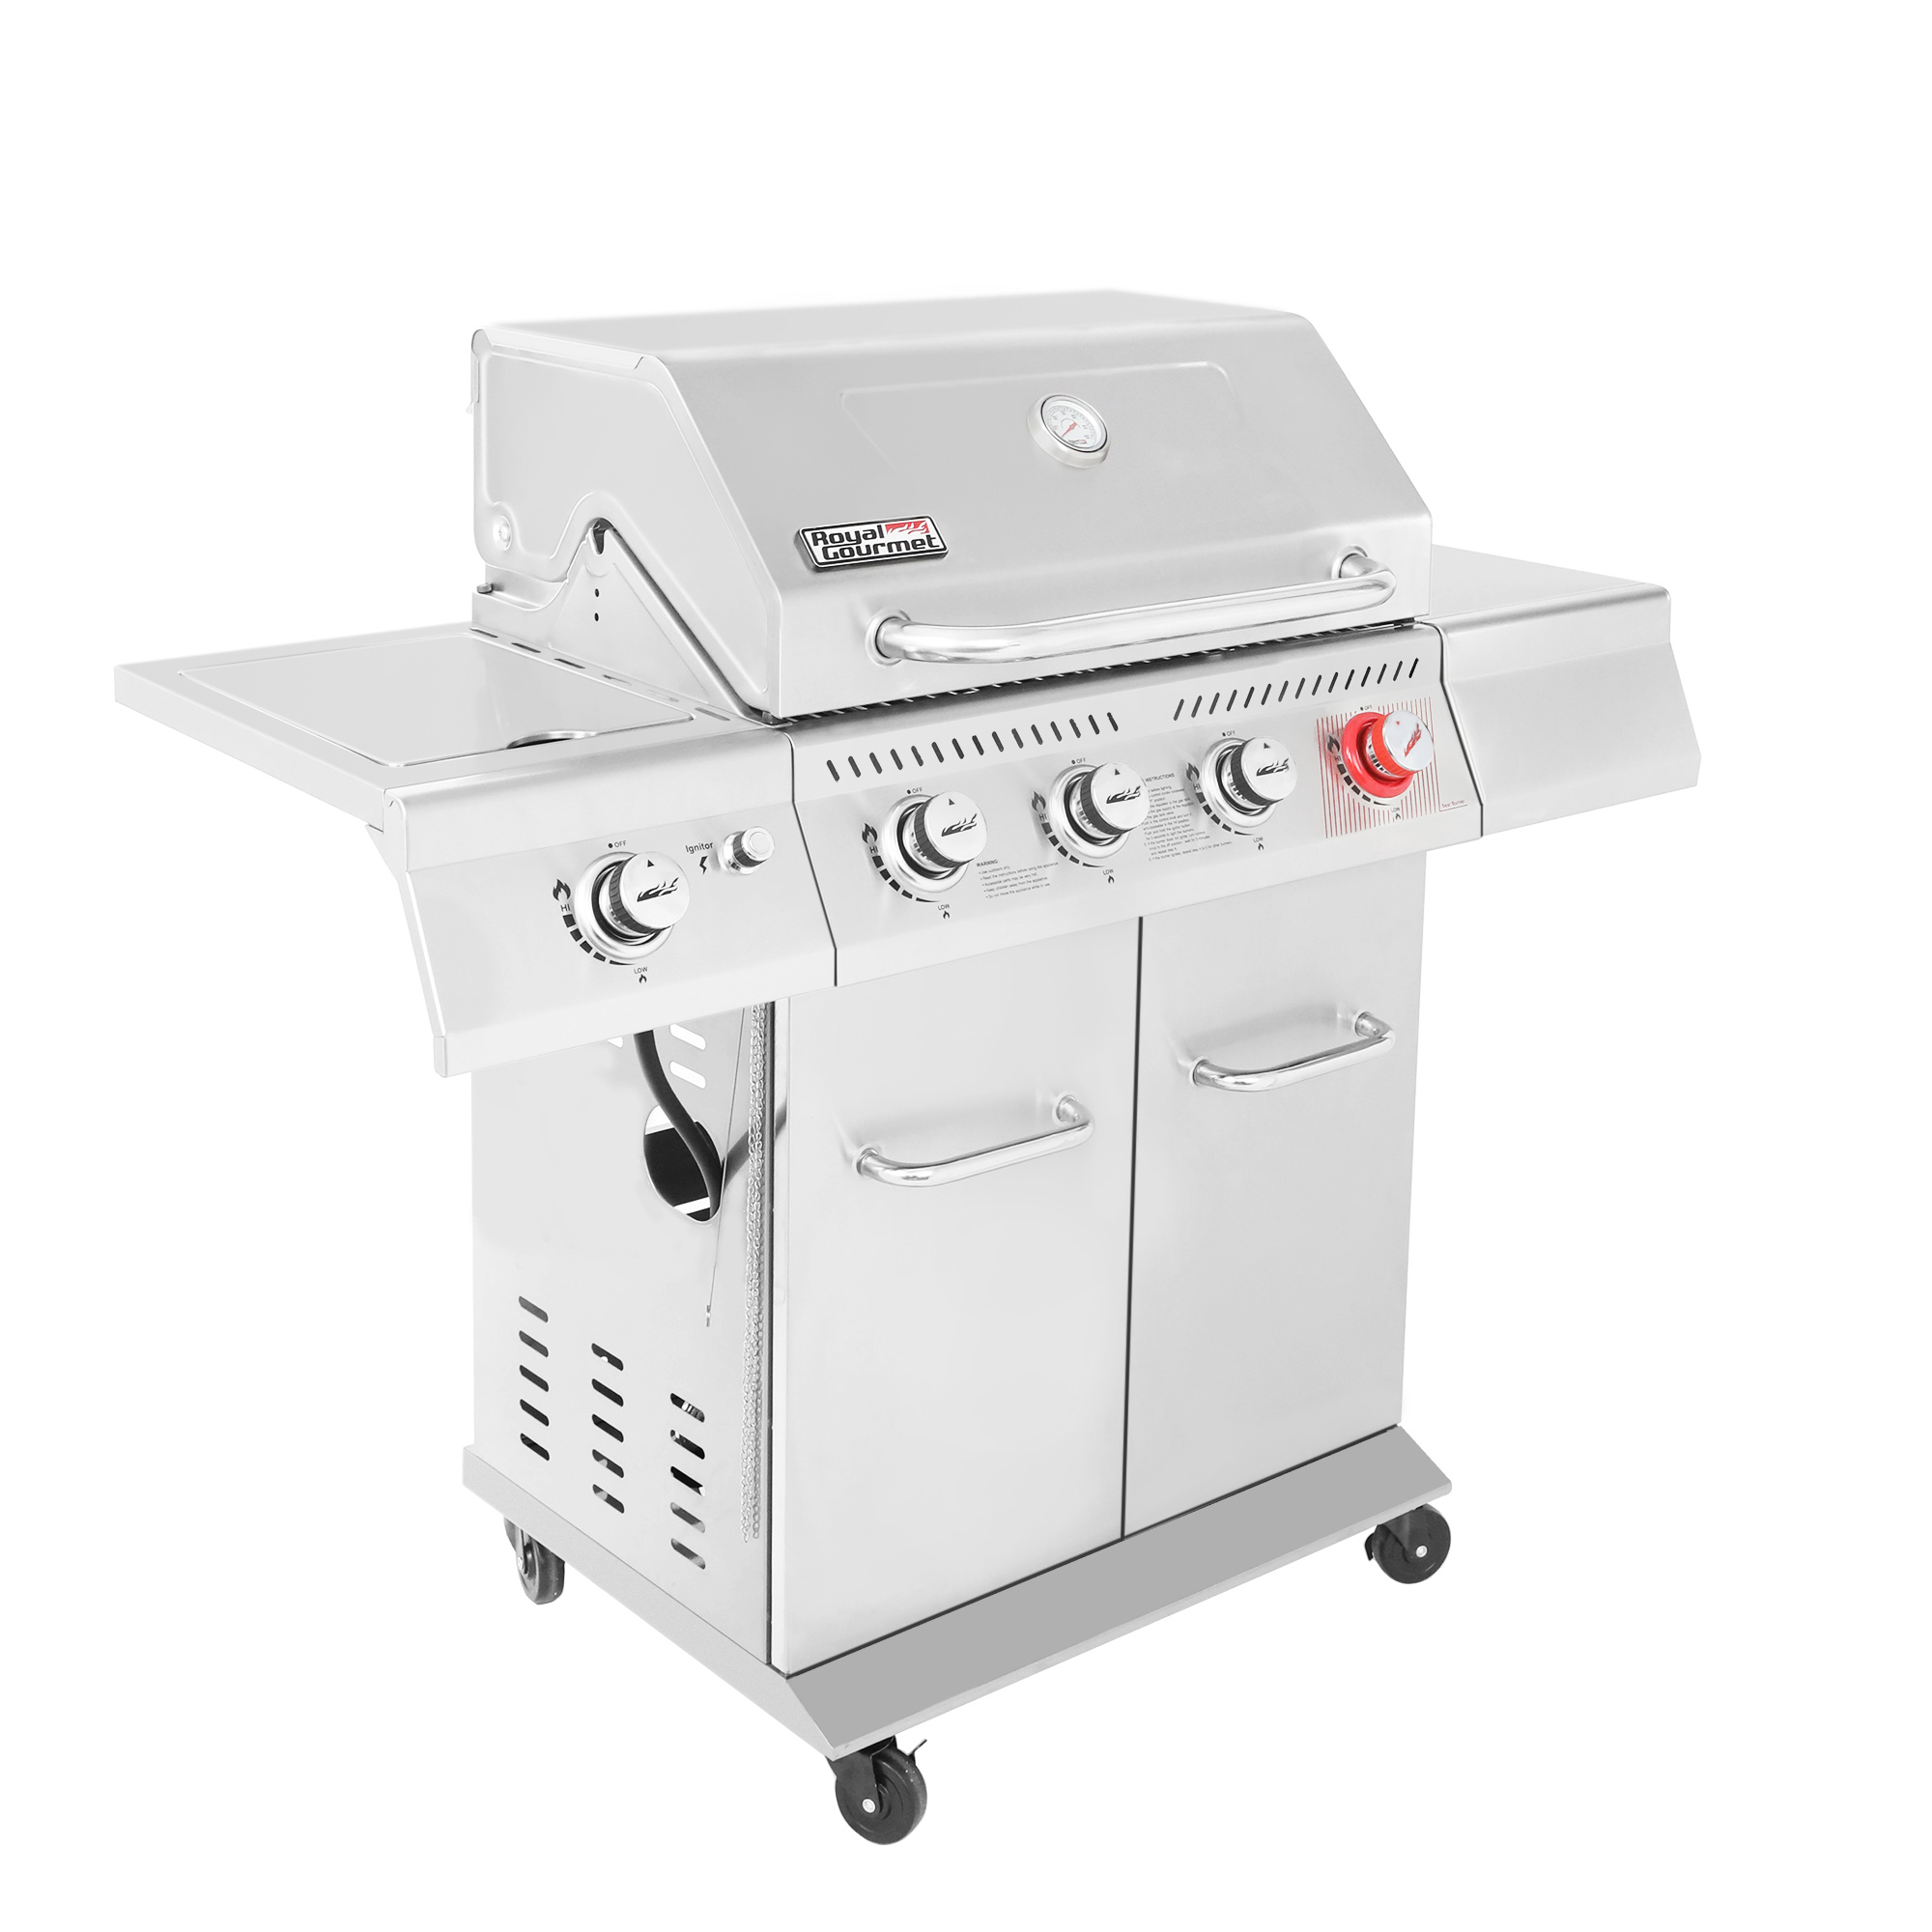 Royal Gourmet GA4402S Stainless Steel 4-Burner BBQ Cabinet Style Gas Grill with Sear Burner and Side Burner Silver - image 4 of 11